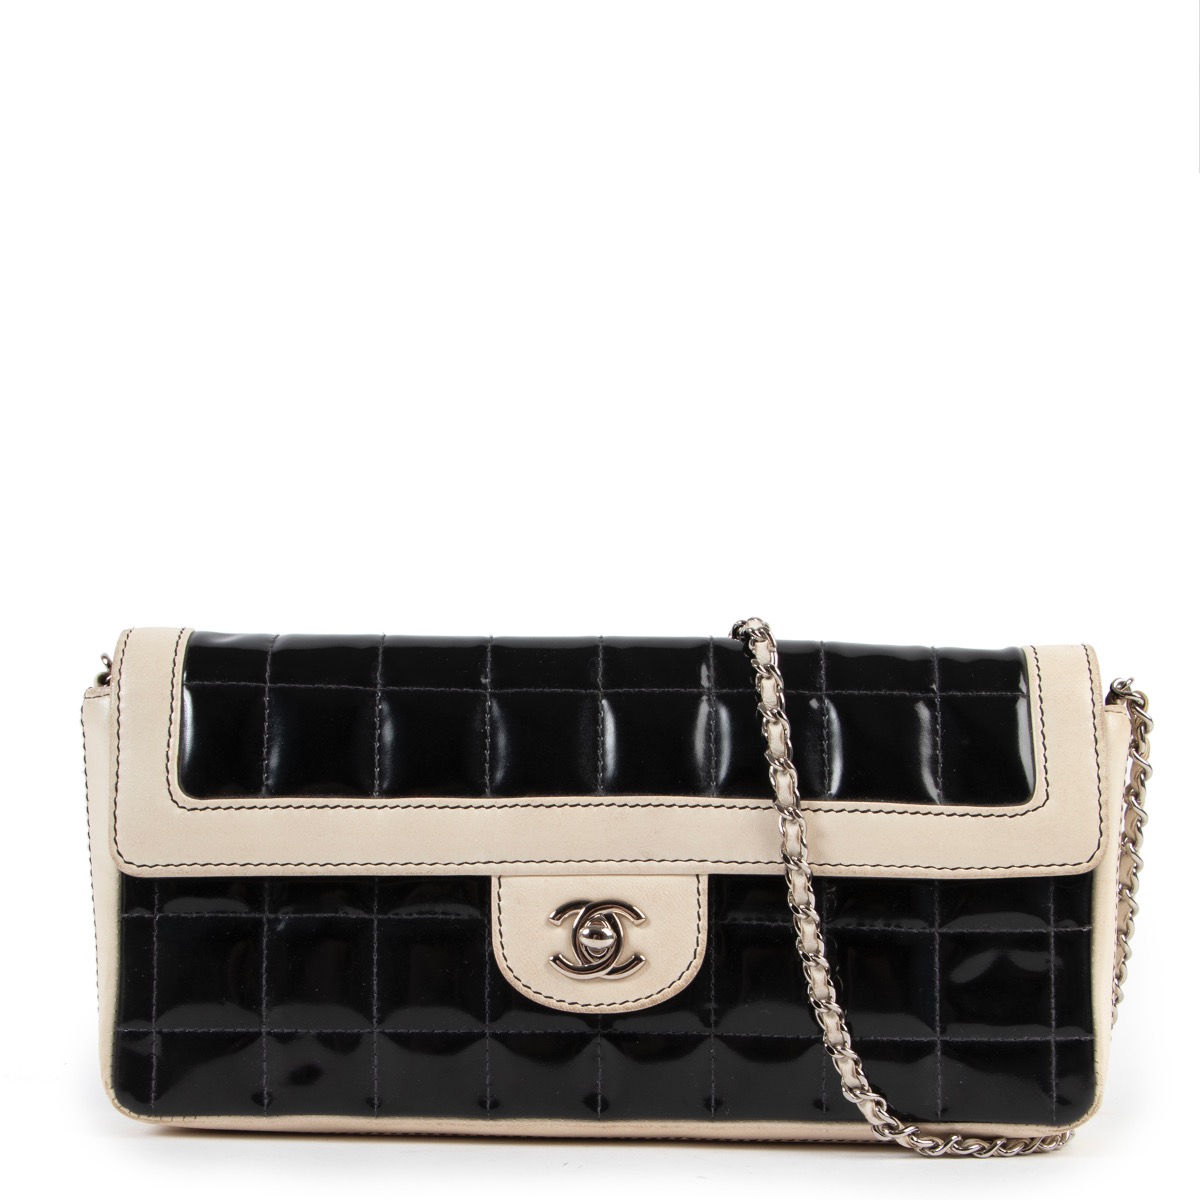 chanel classic colors 10